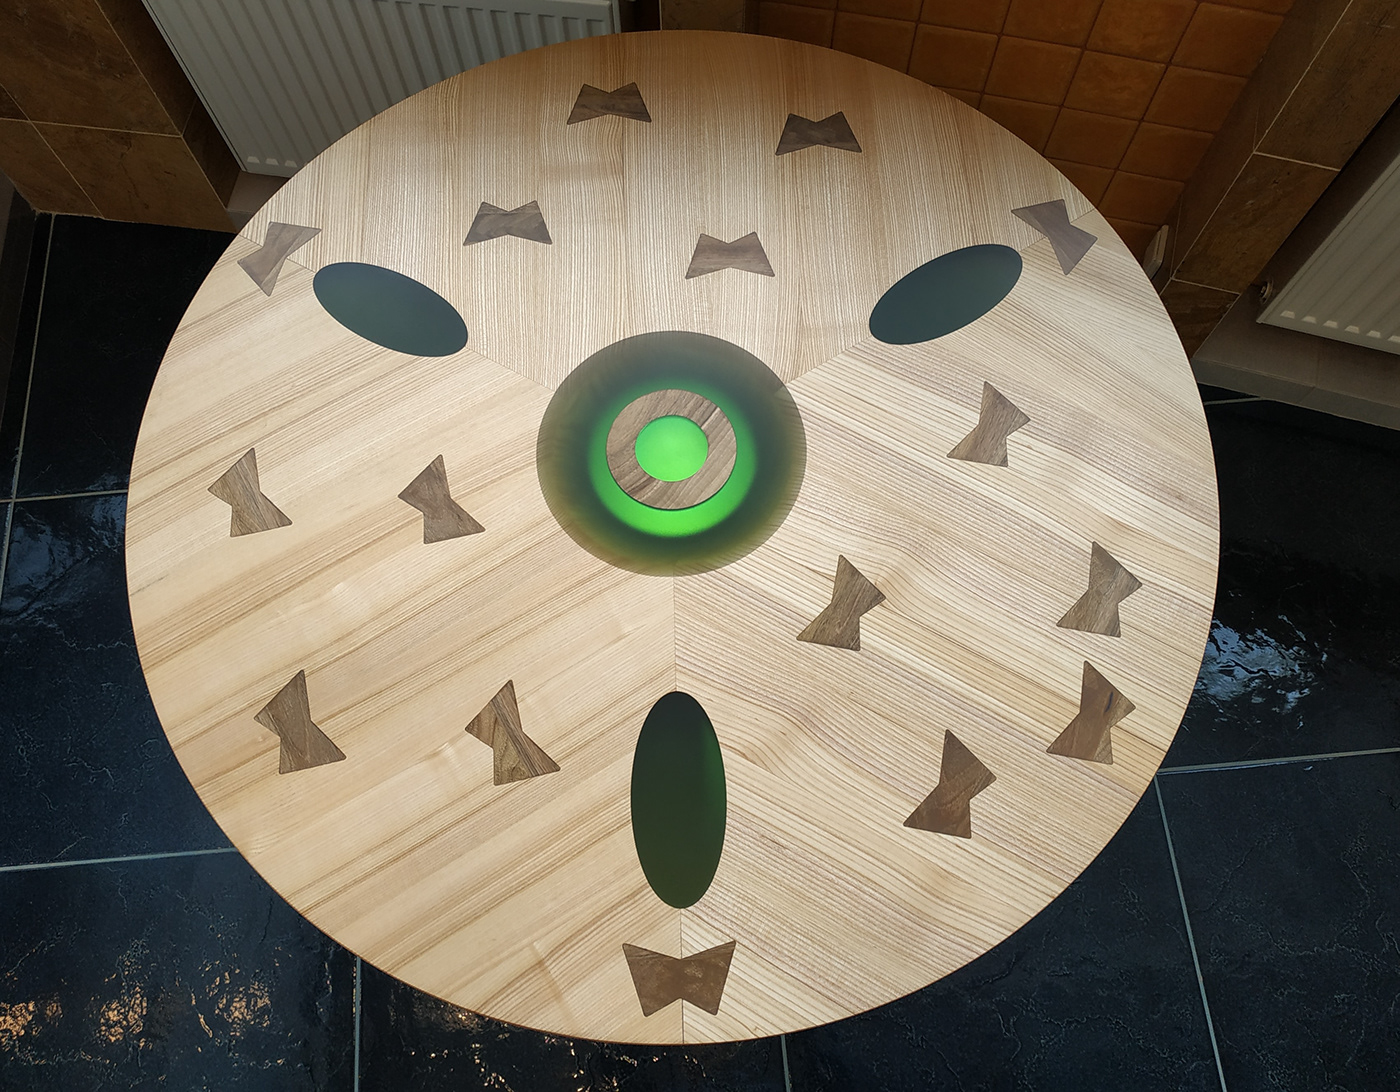 Design furniture epoxy resin markentry natural ash wood Polished stainless steel table Thickness 60mm walnut inlay Butterflies of the Soul